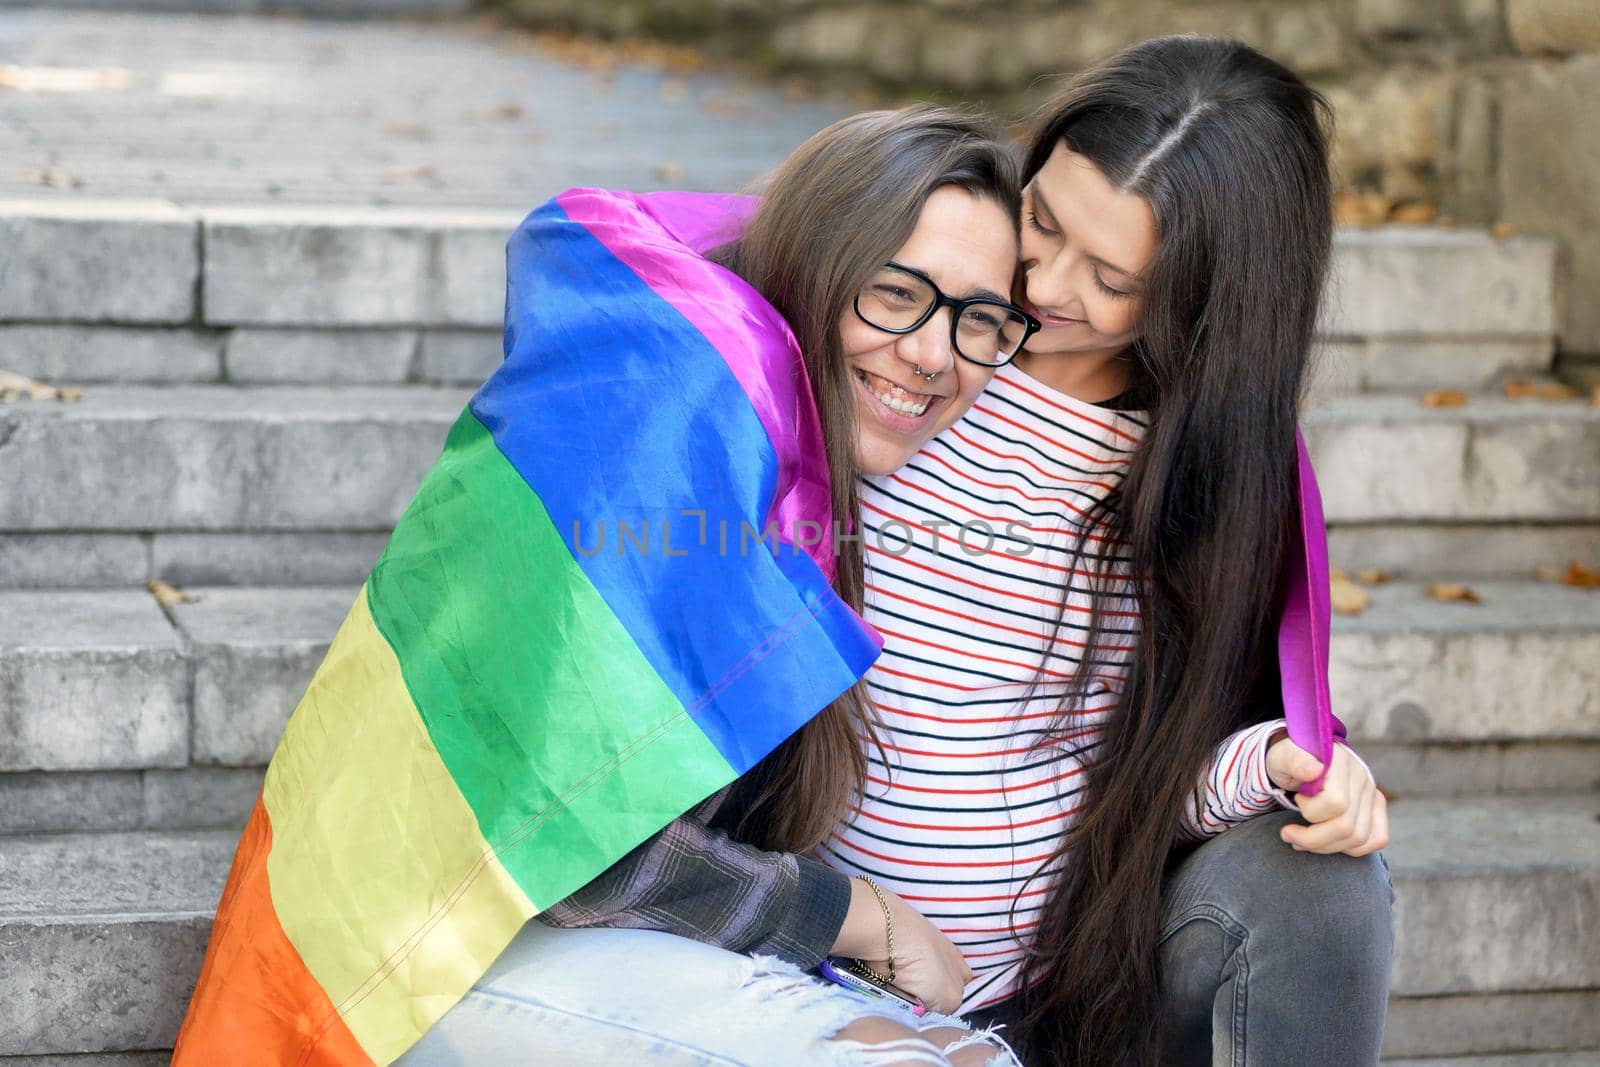 Lesbian couple sitting on steps hugging with rainbow flag at urban scenery. High quality photo.